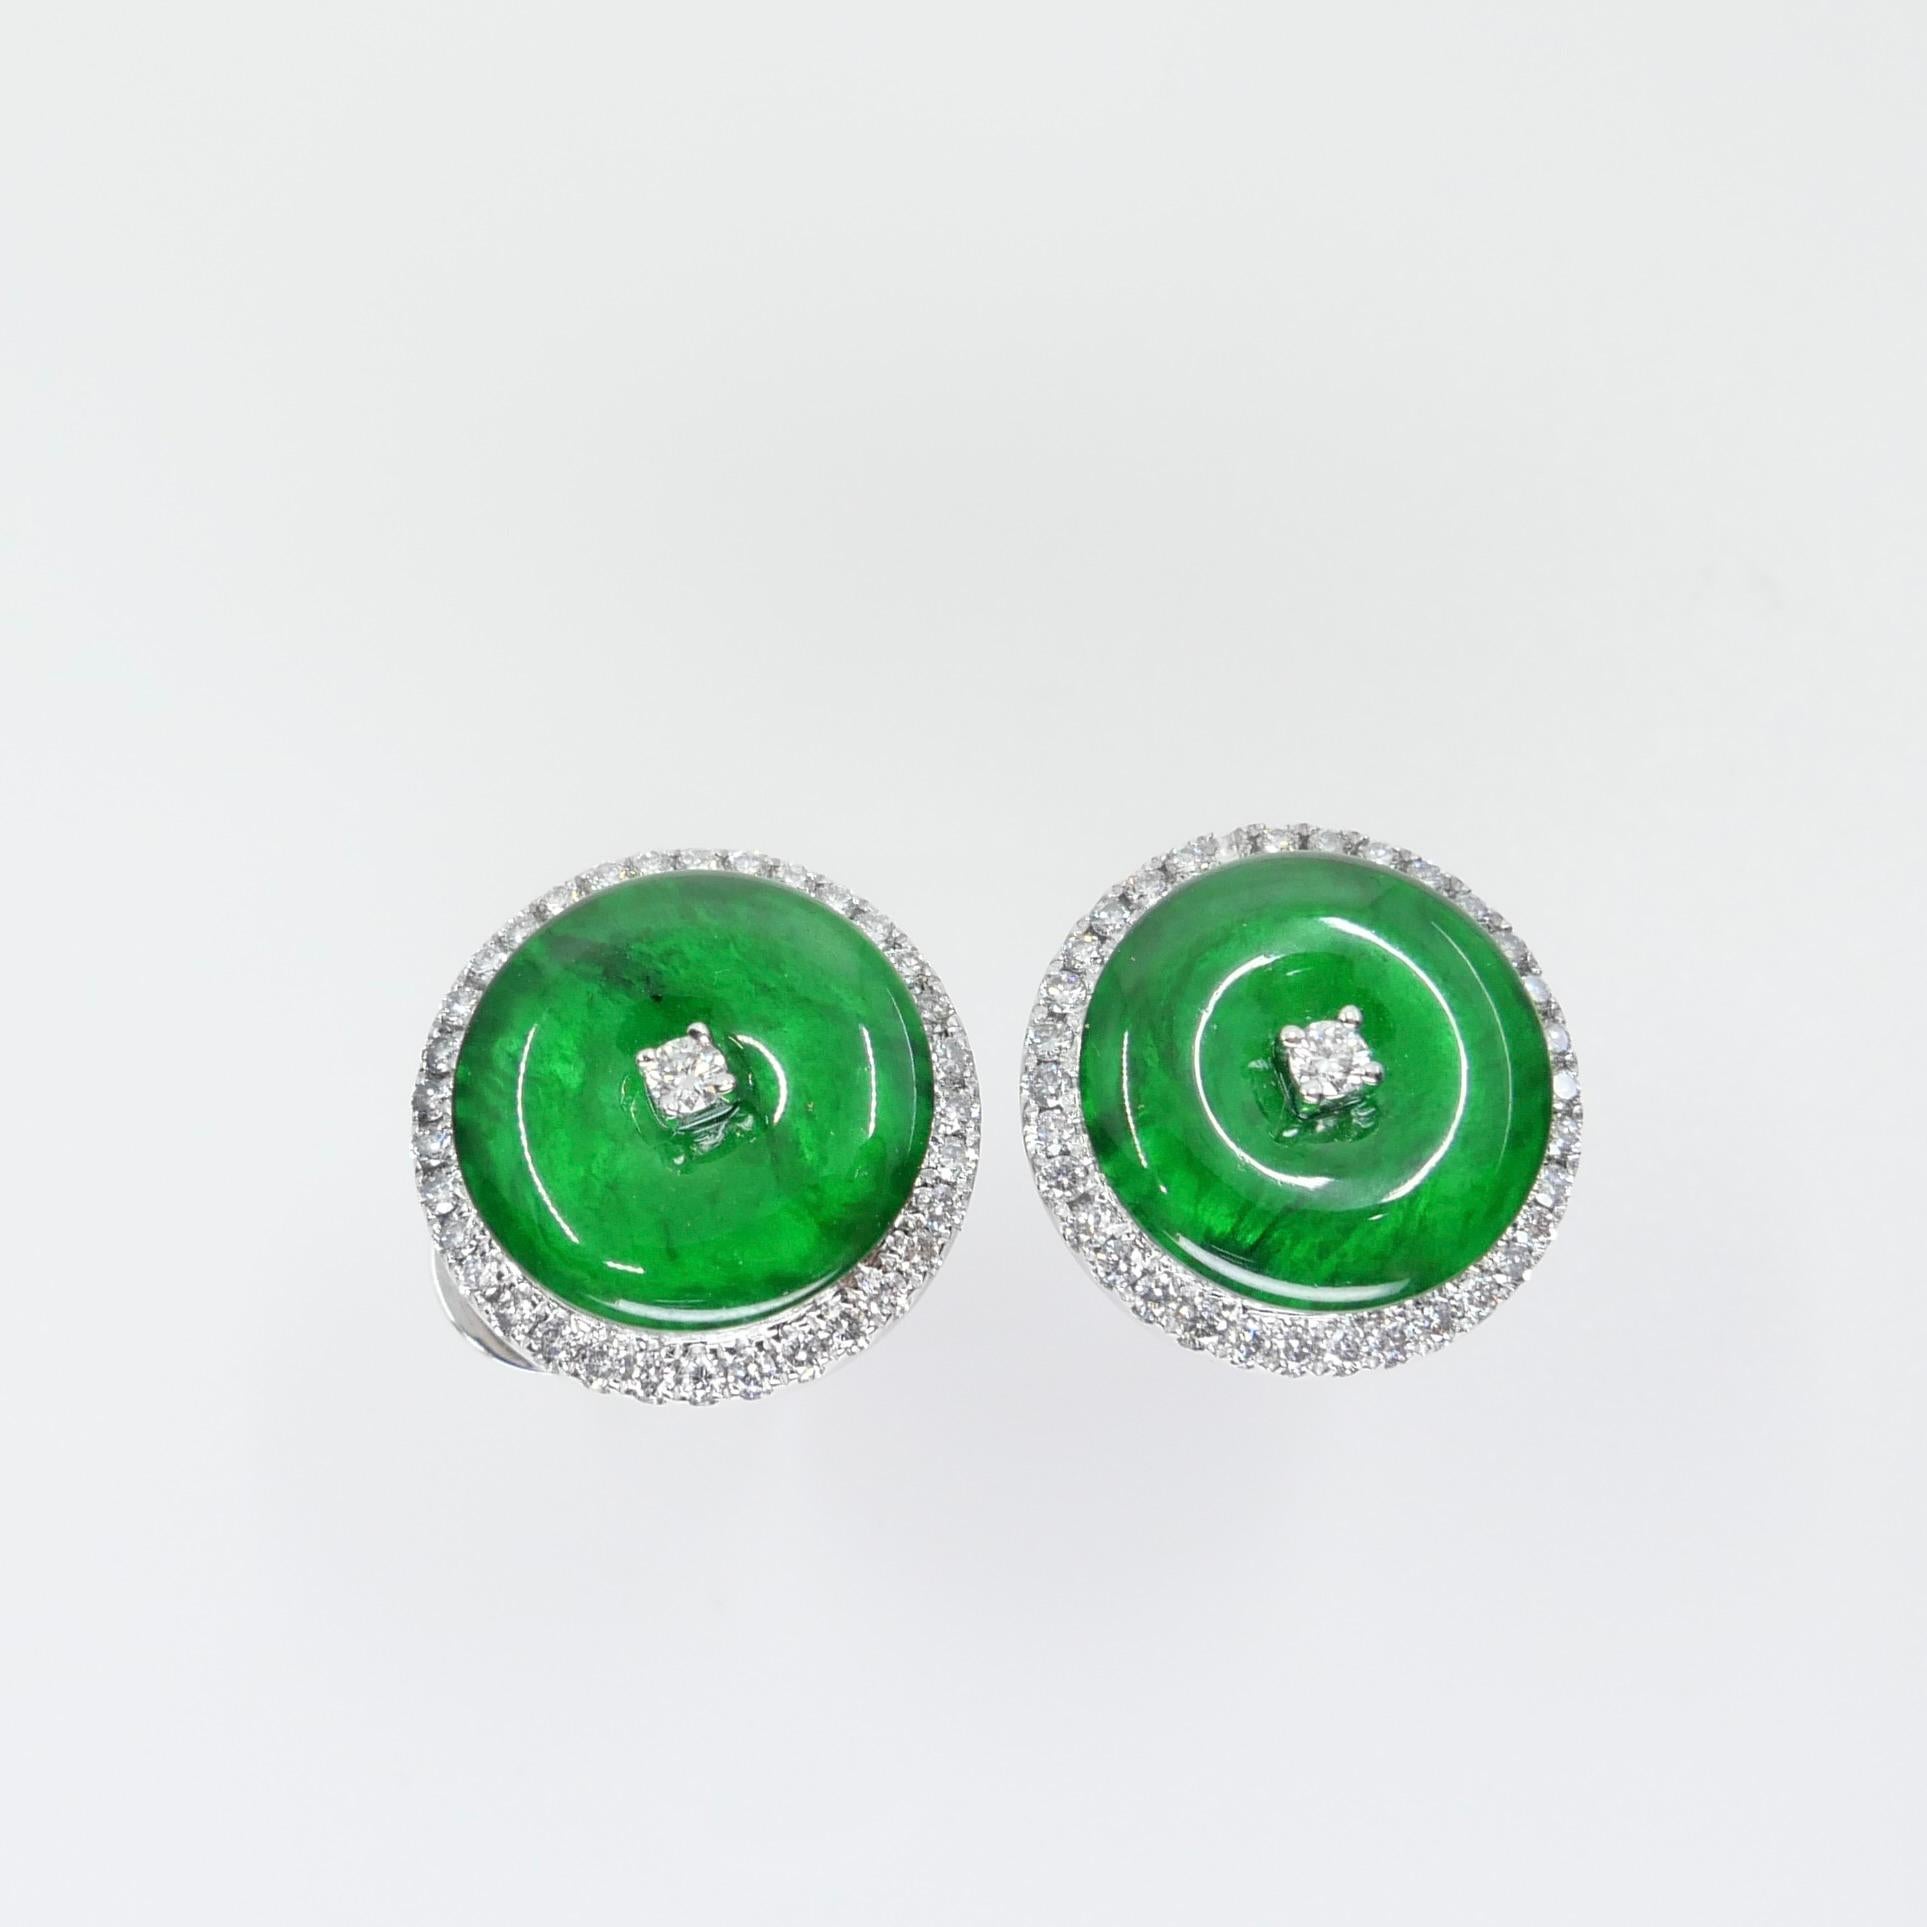 Certified Natural Type A Jadeite Jade And Diamond Earrings. Apple Green Color For Sale 4